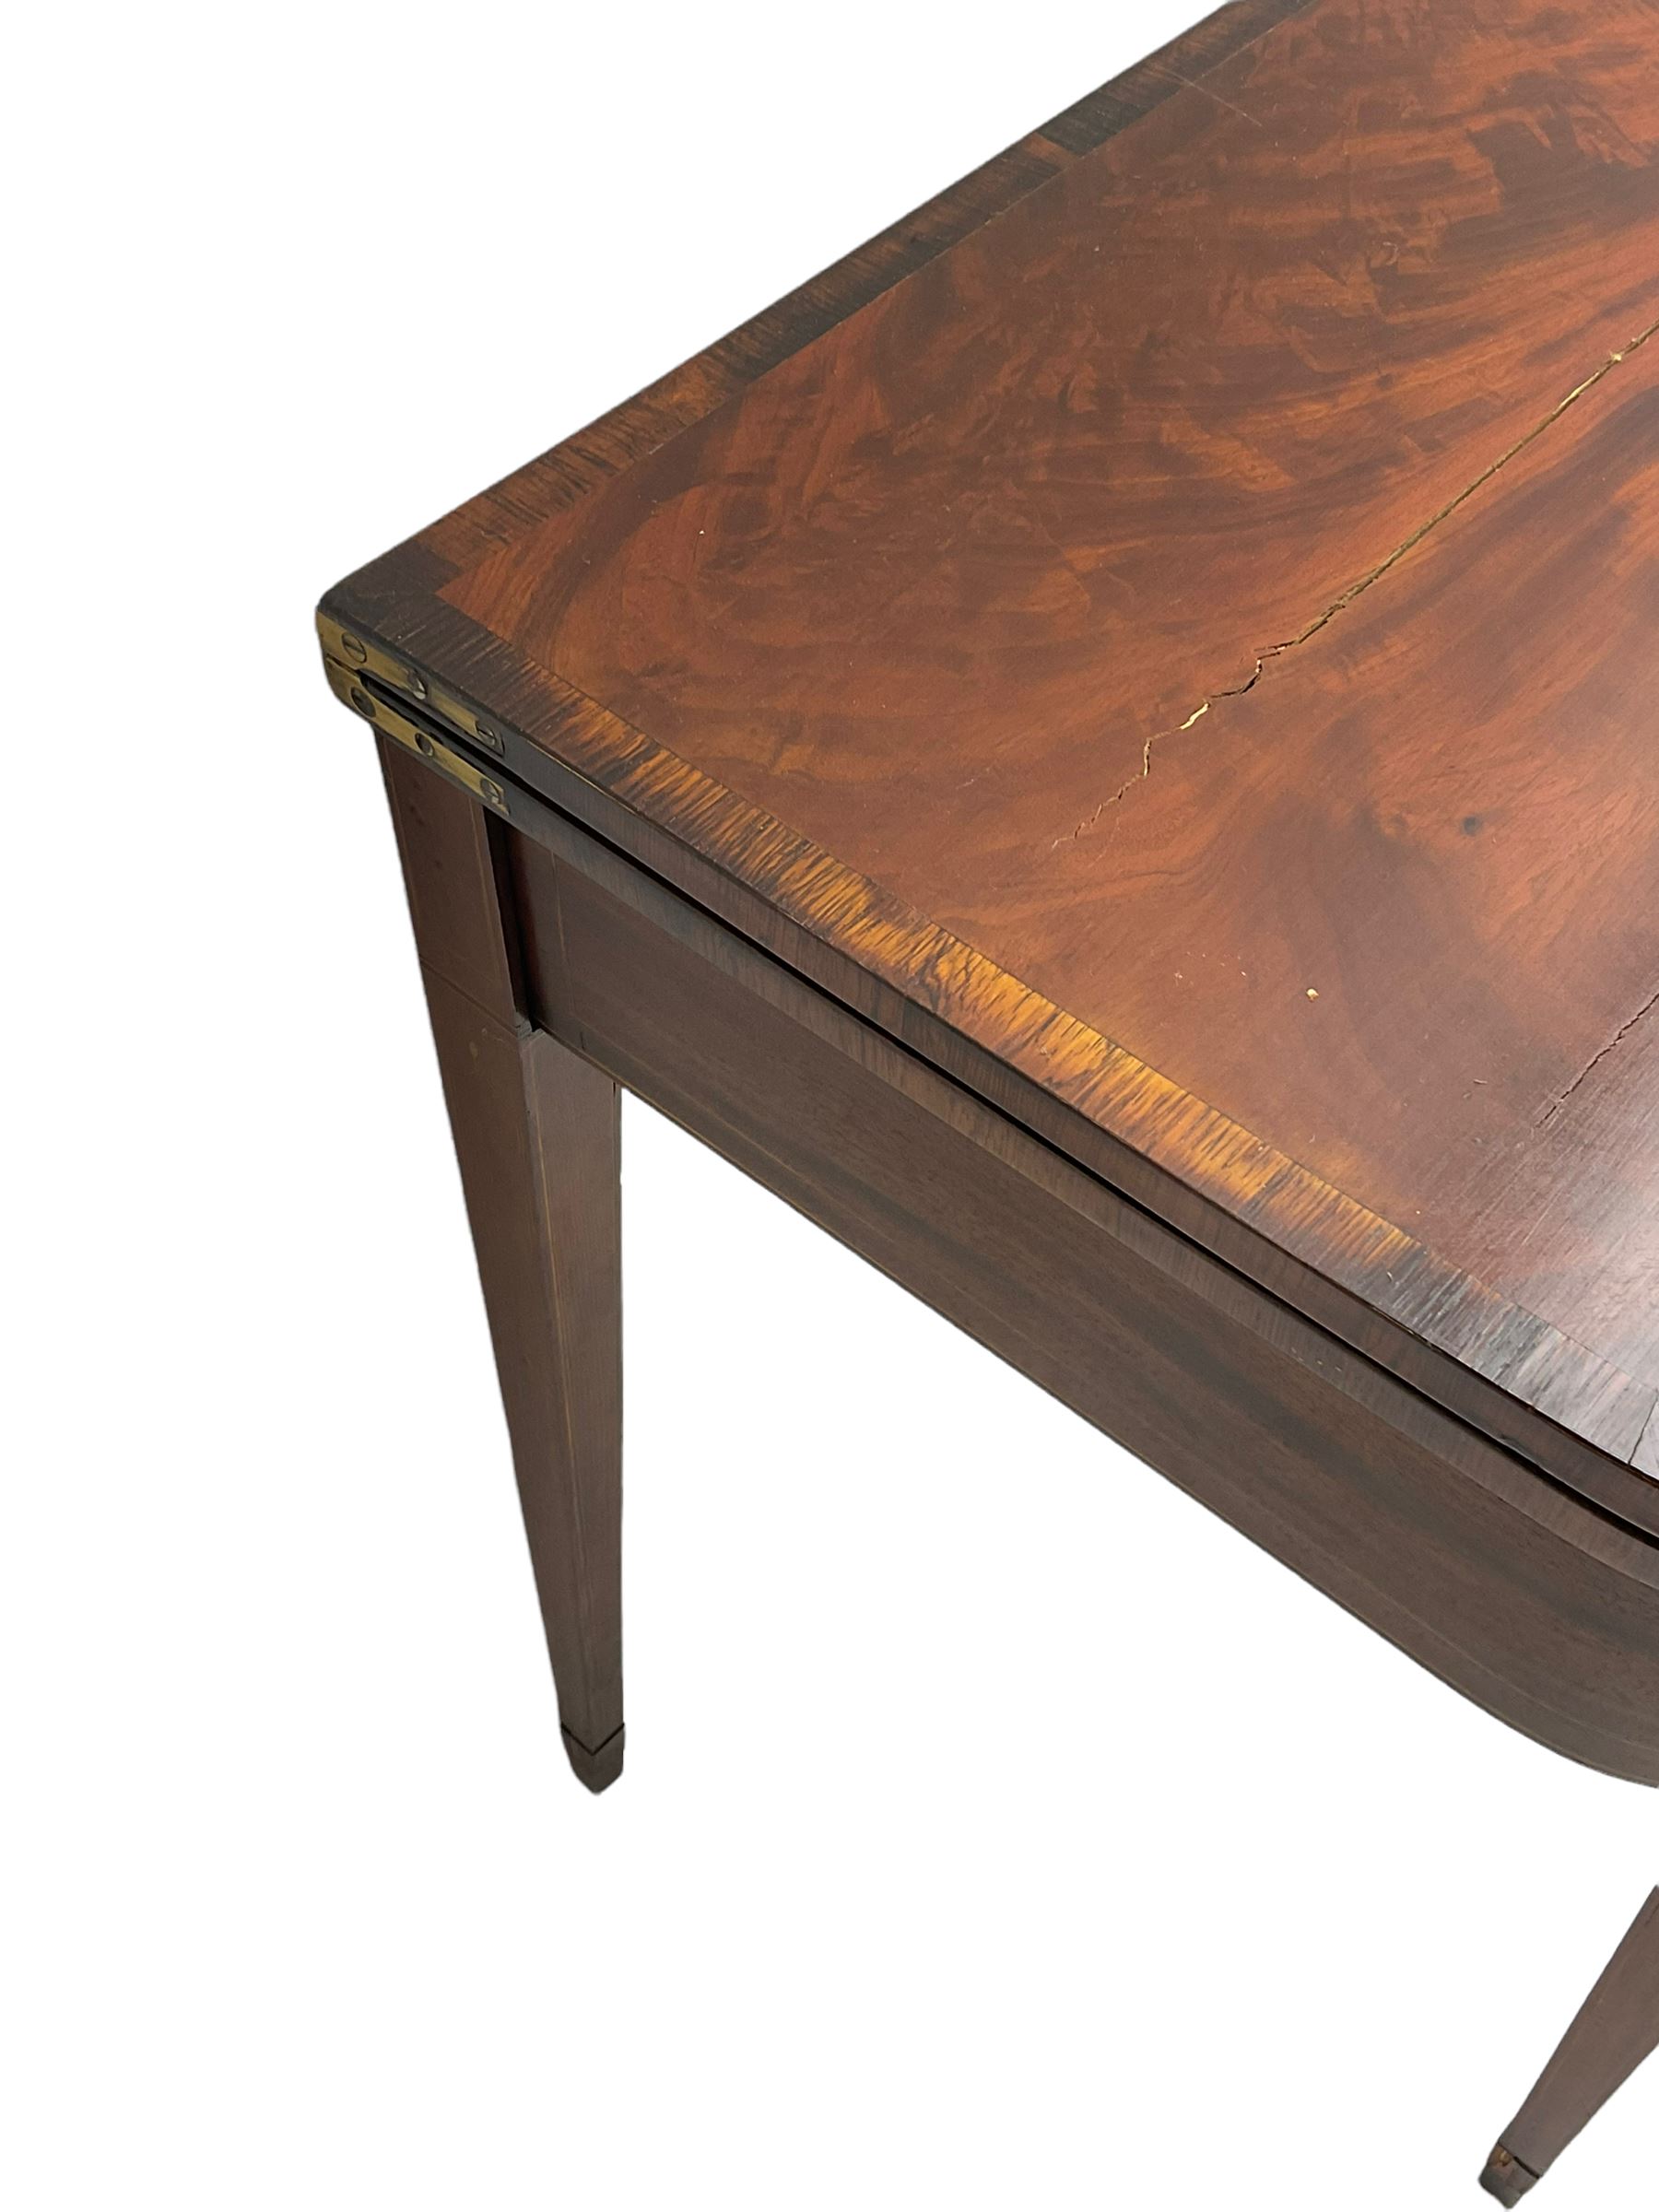 Early 19th century figured mahogany side or tea table - Image 4 of 4